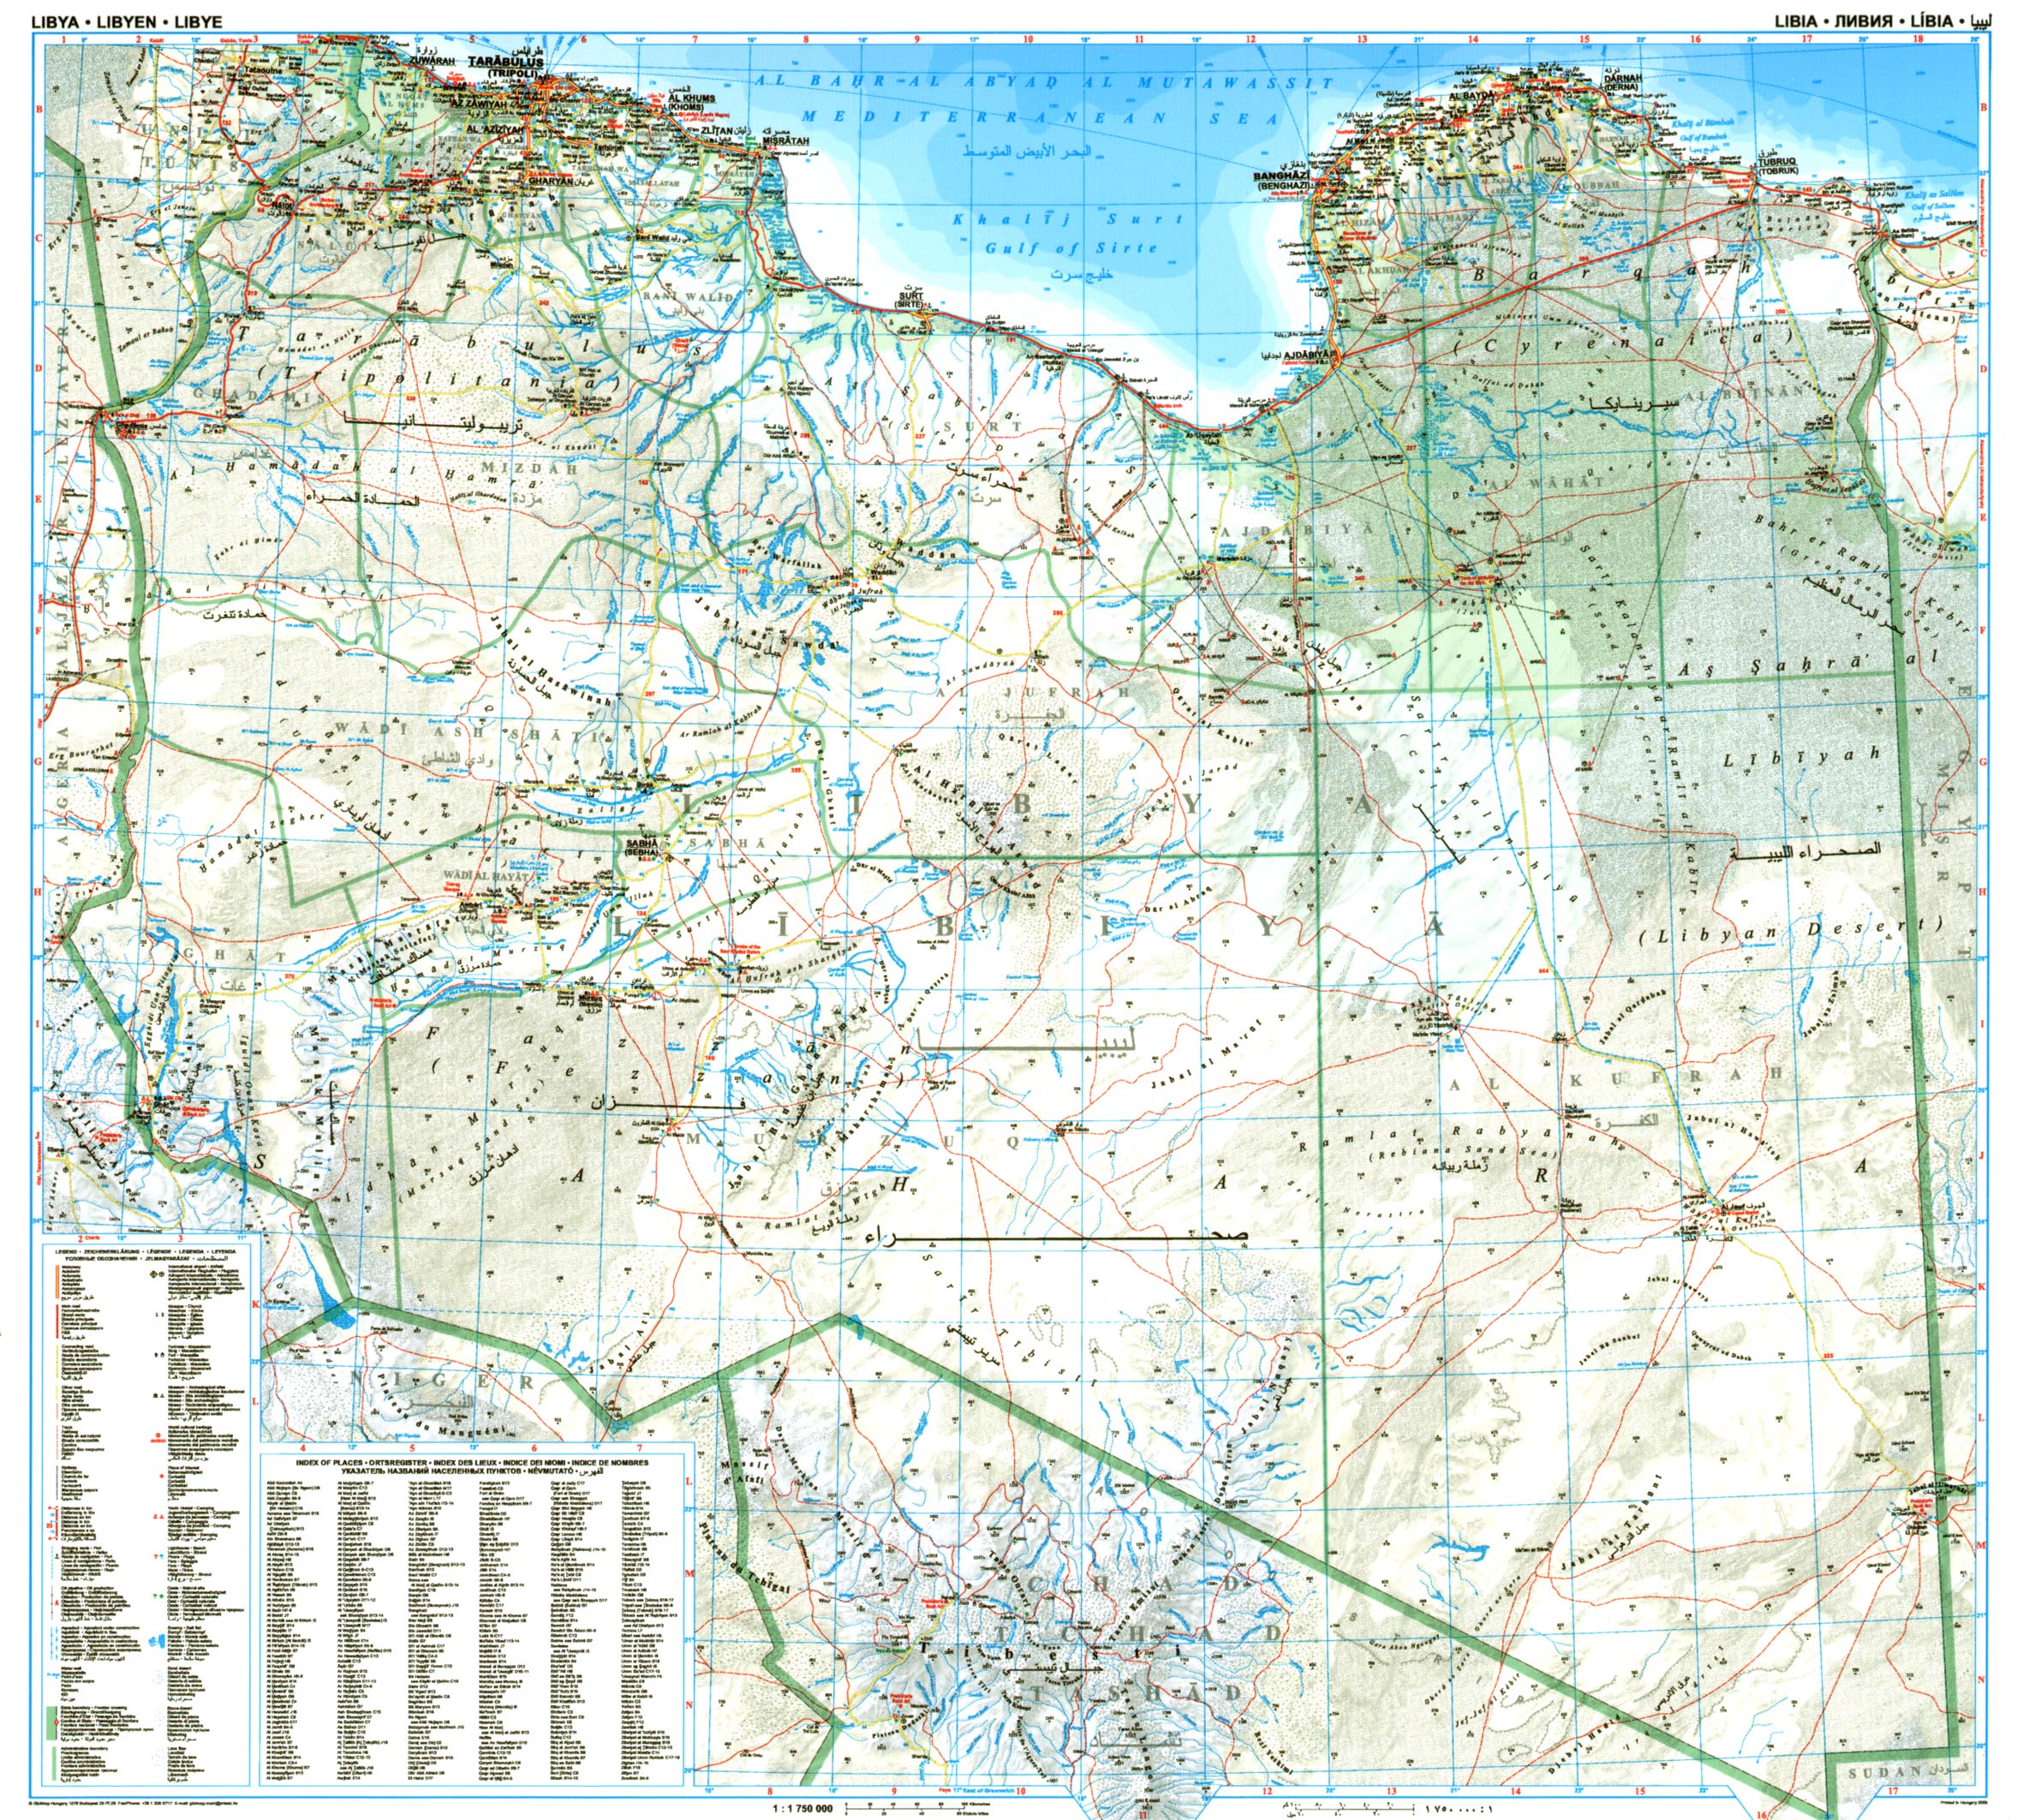 Libya (road) overview map